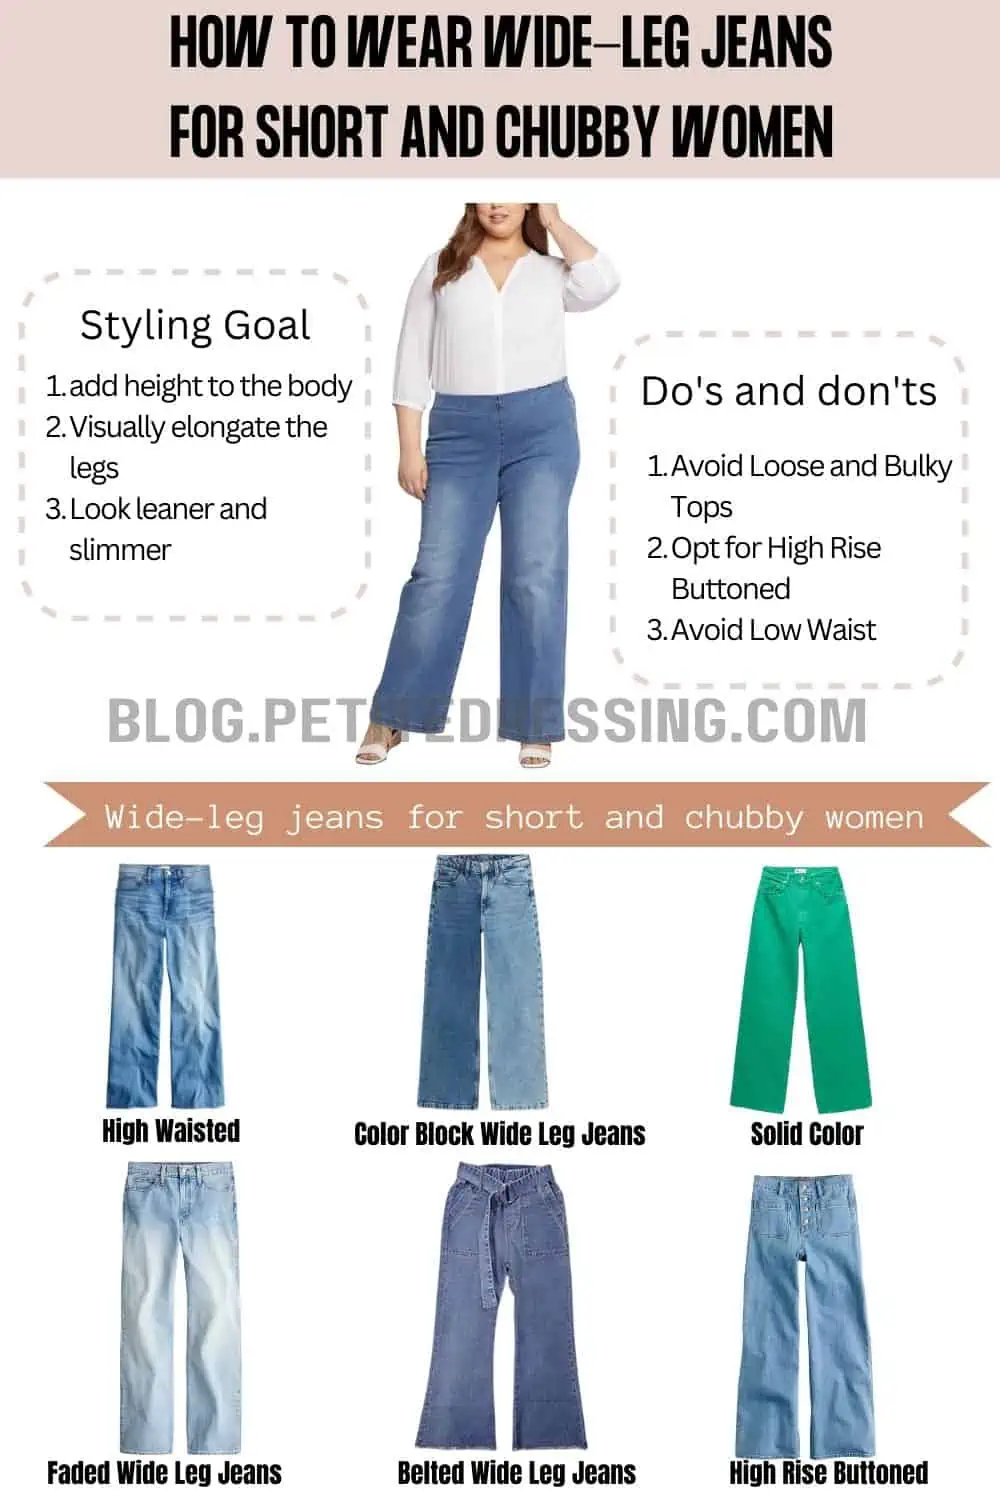 How to wear flare jeans if you have short legs (like me) 